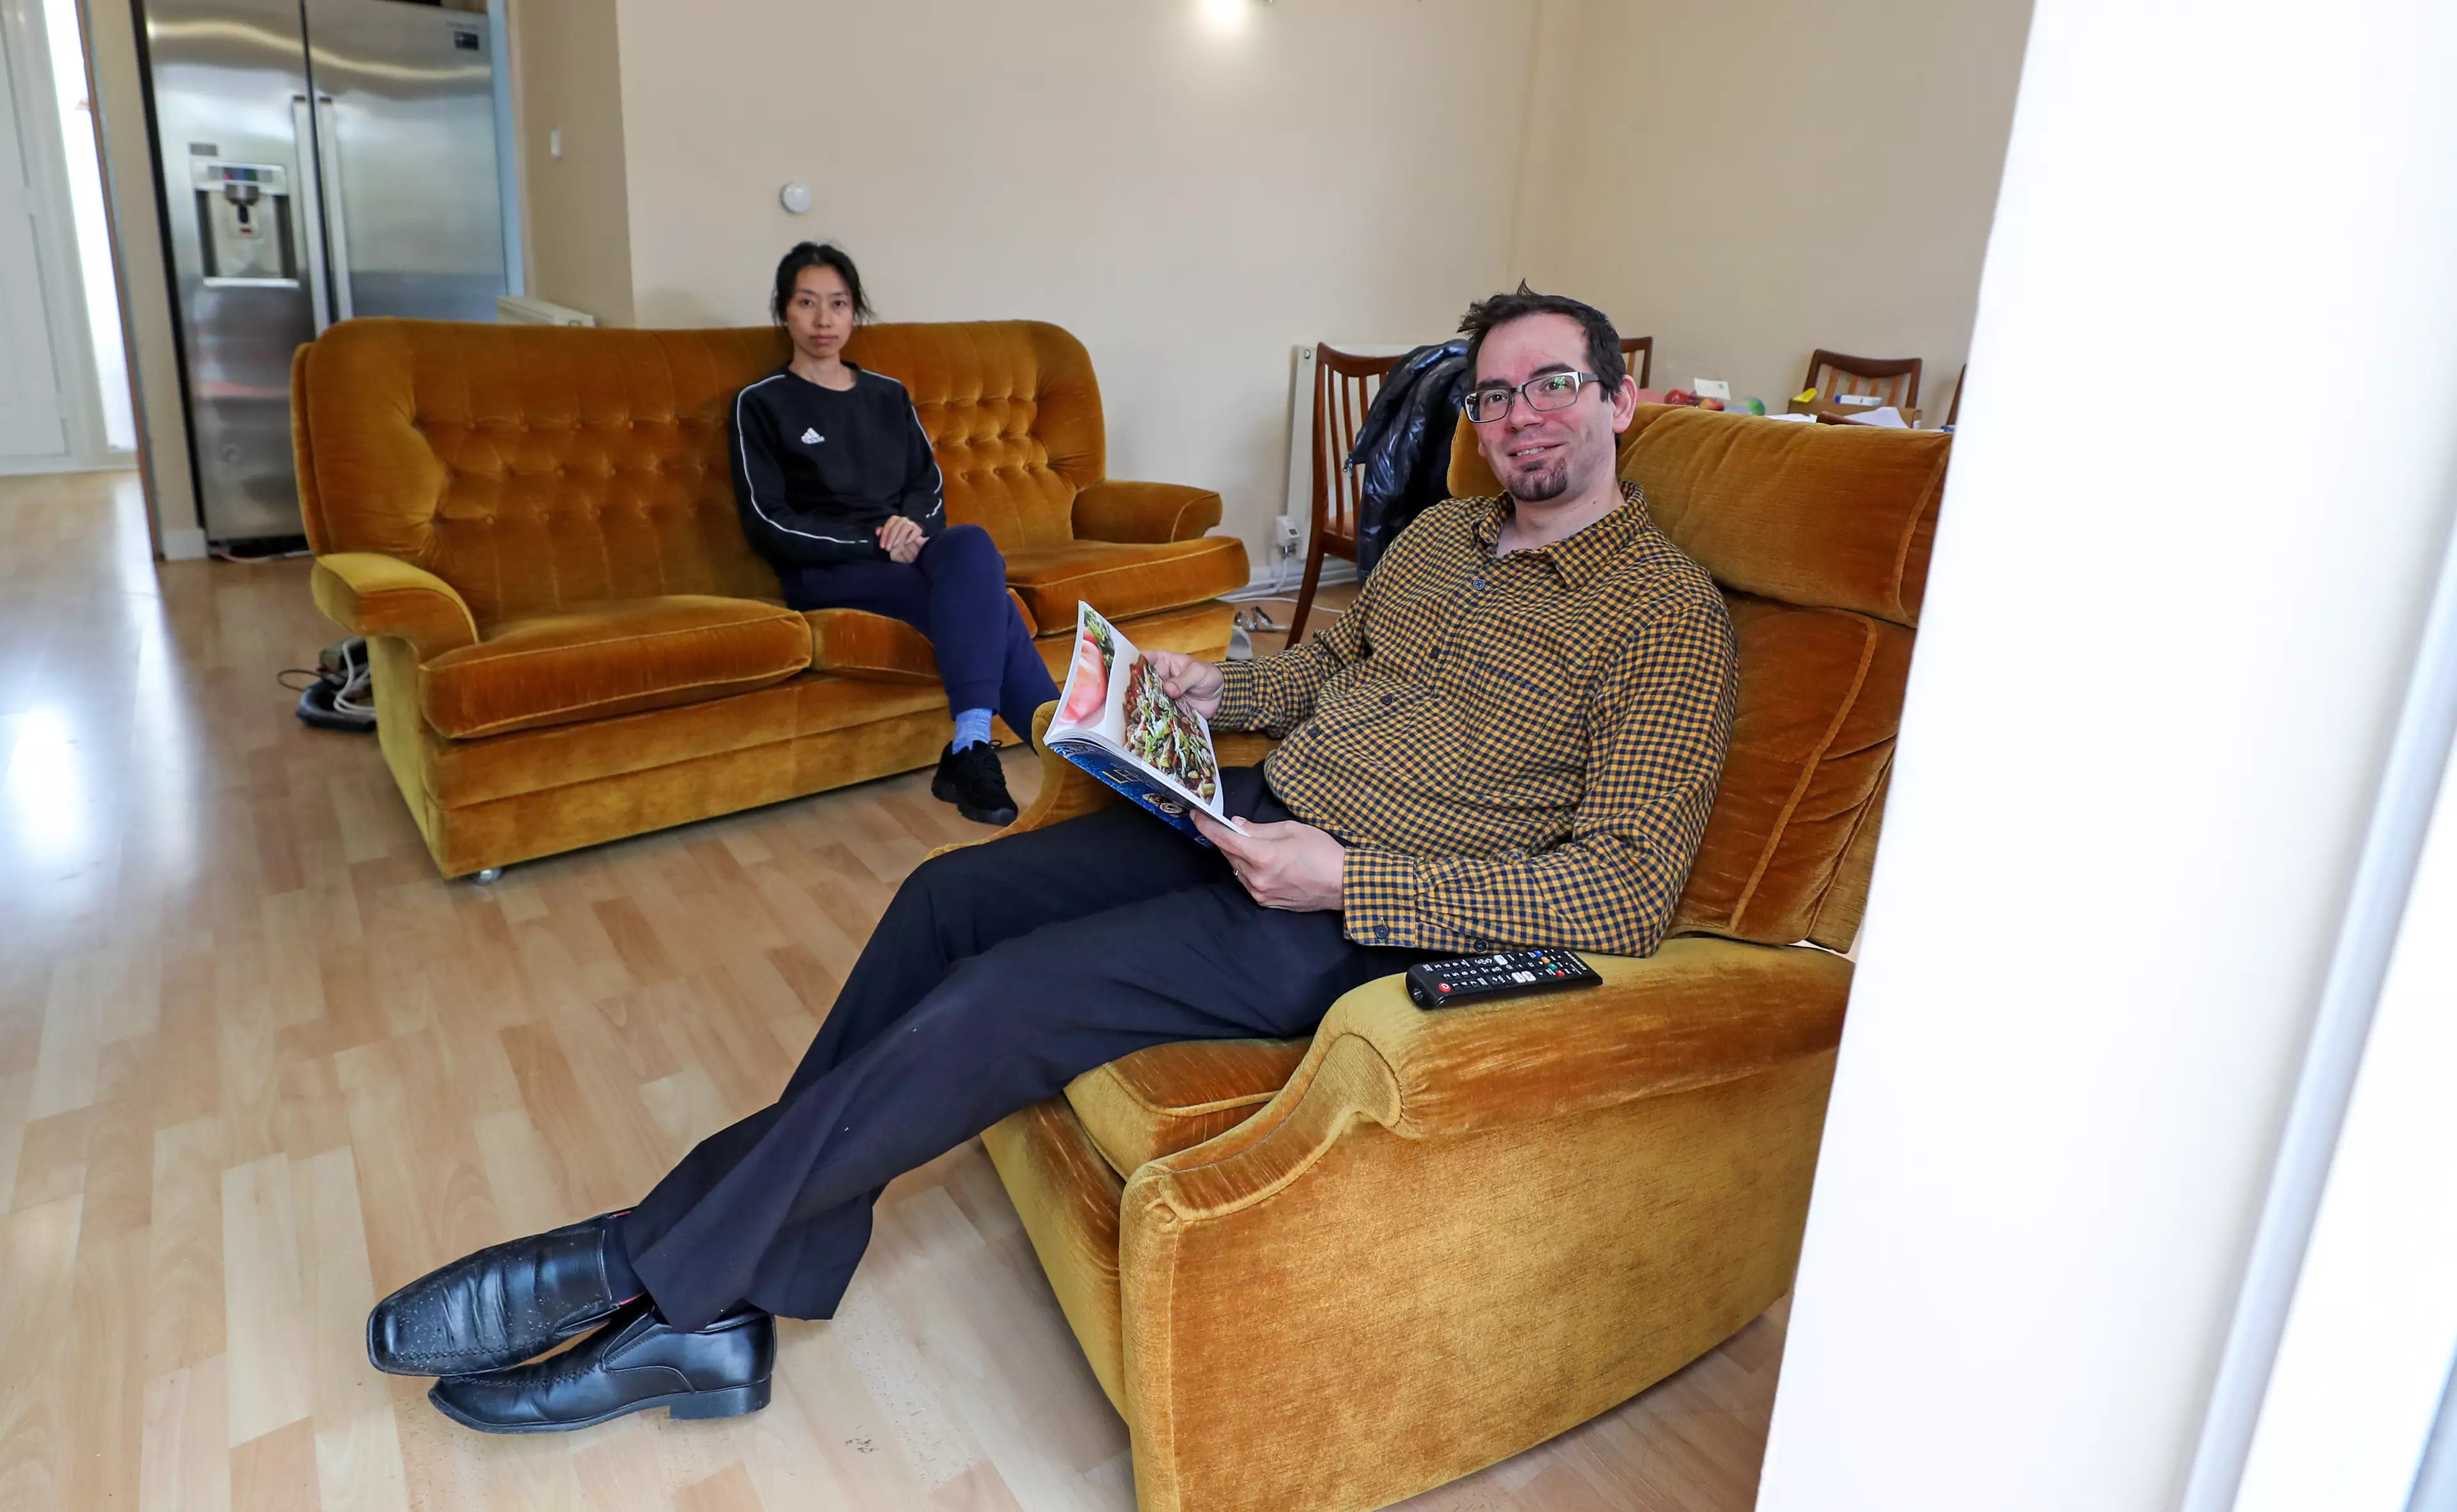 The couple are living in Knutsford while in lockdown in the UK.